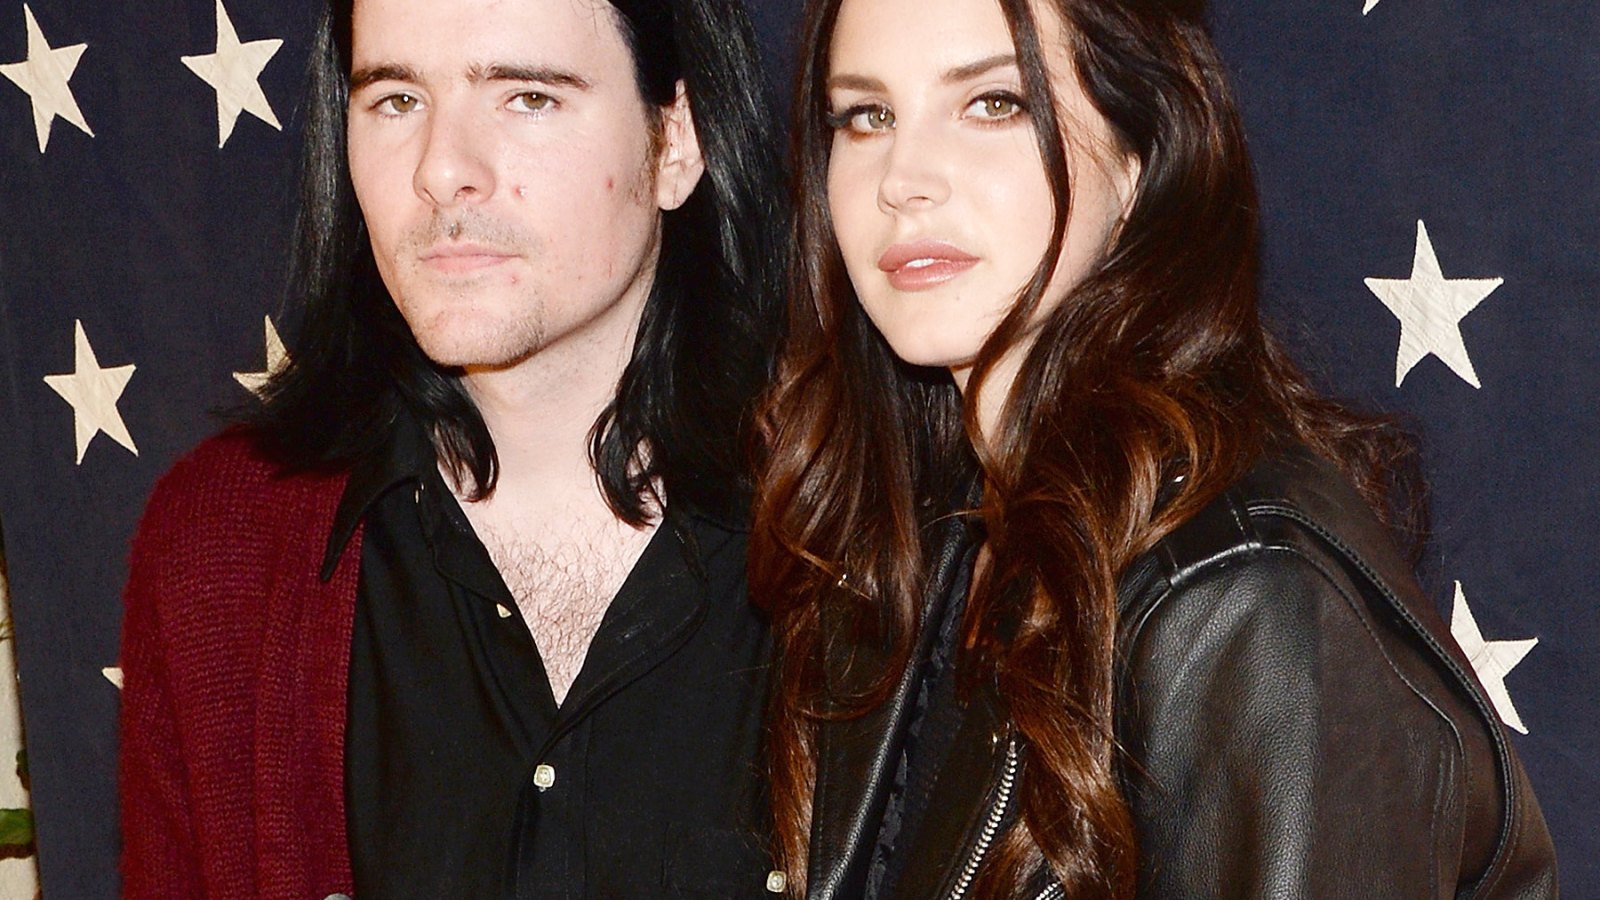 Barrie James O'Neil and Lana Del Rey attend an event on Nov. 1, 2013